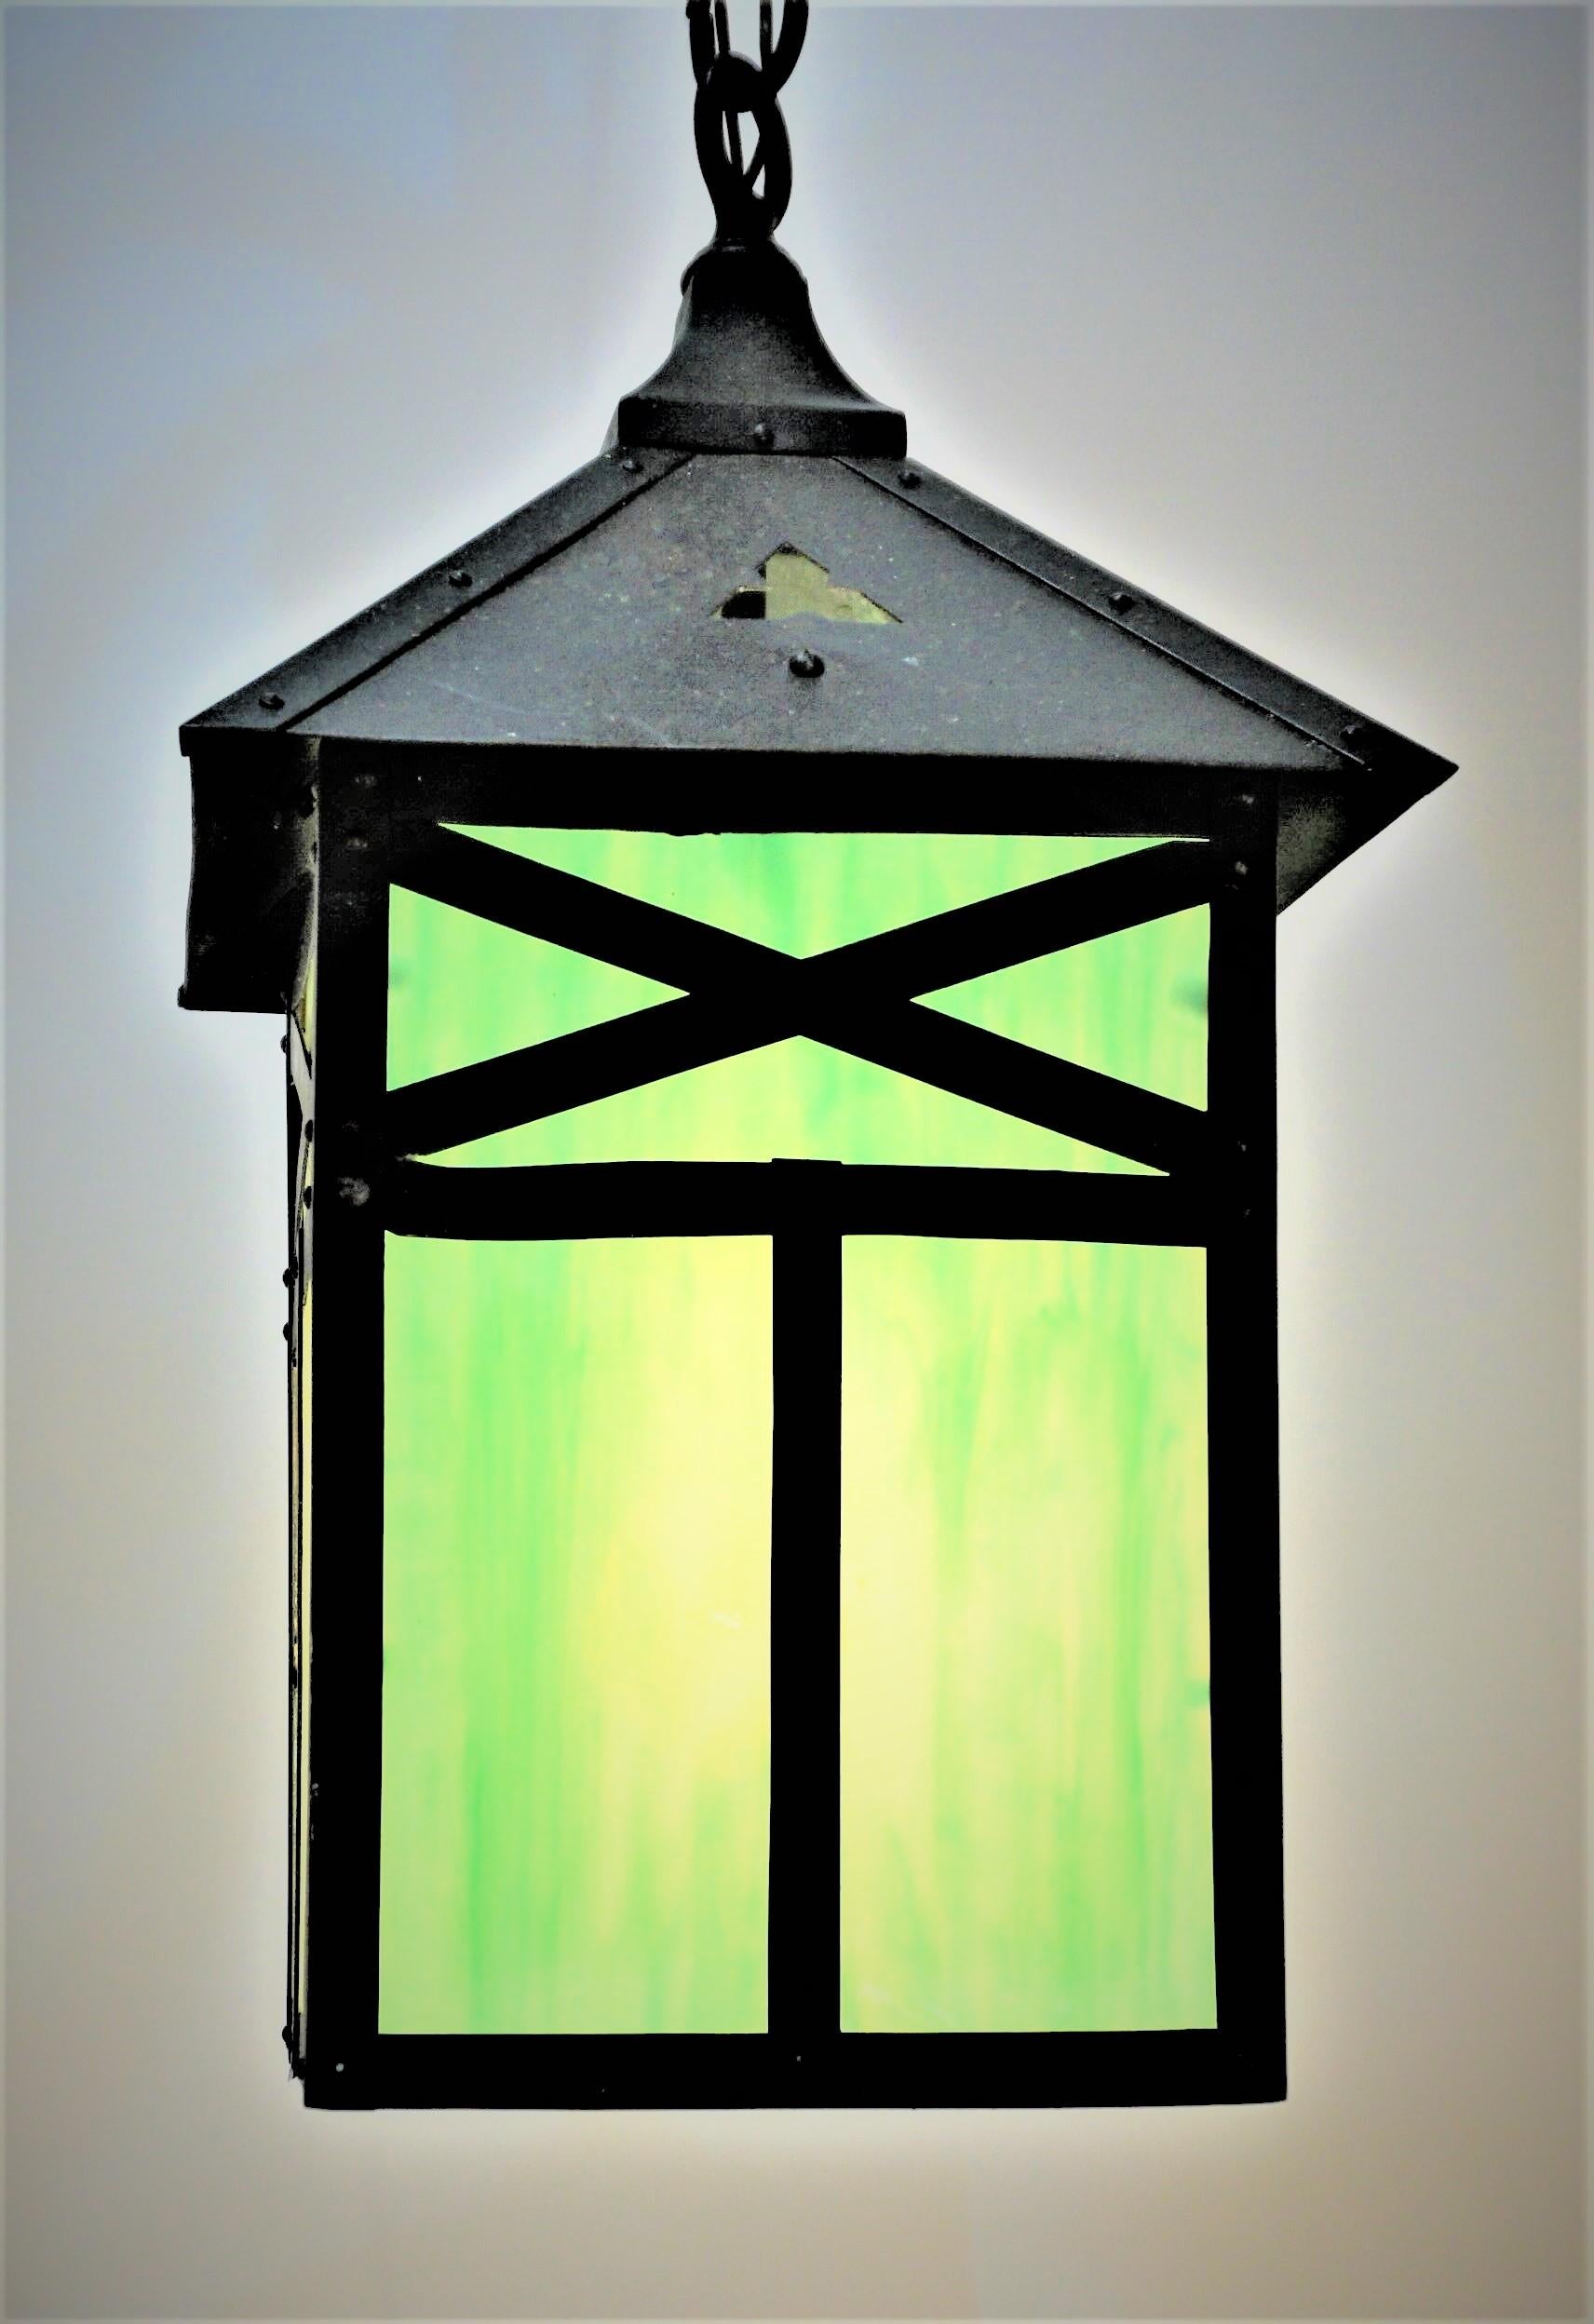 Arts & Crafts Mission stained glass lantern.
New wiring and ready for installation.
Minimum height fully installed 21